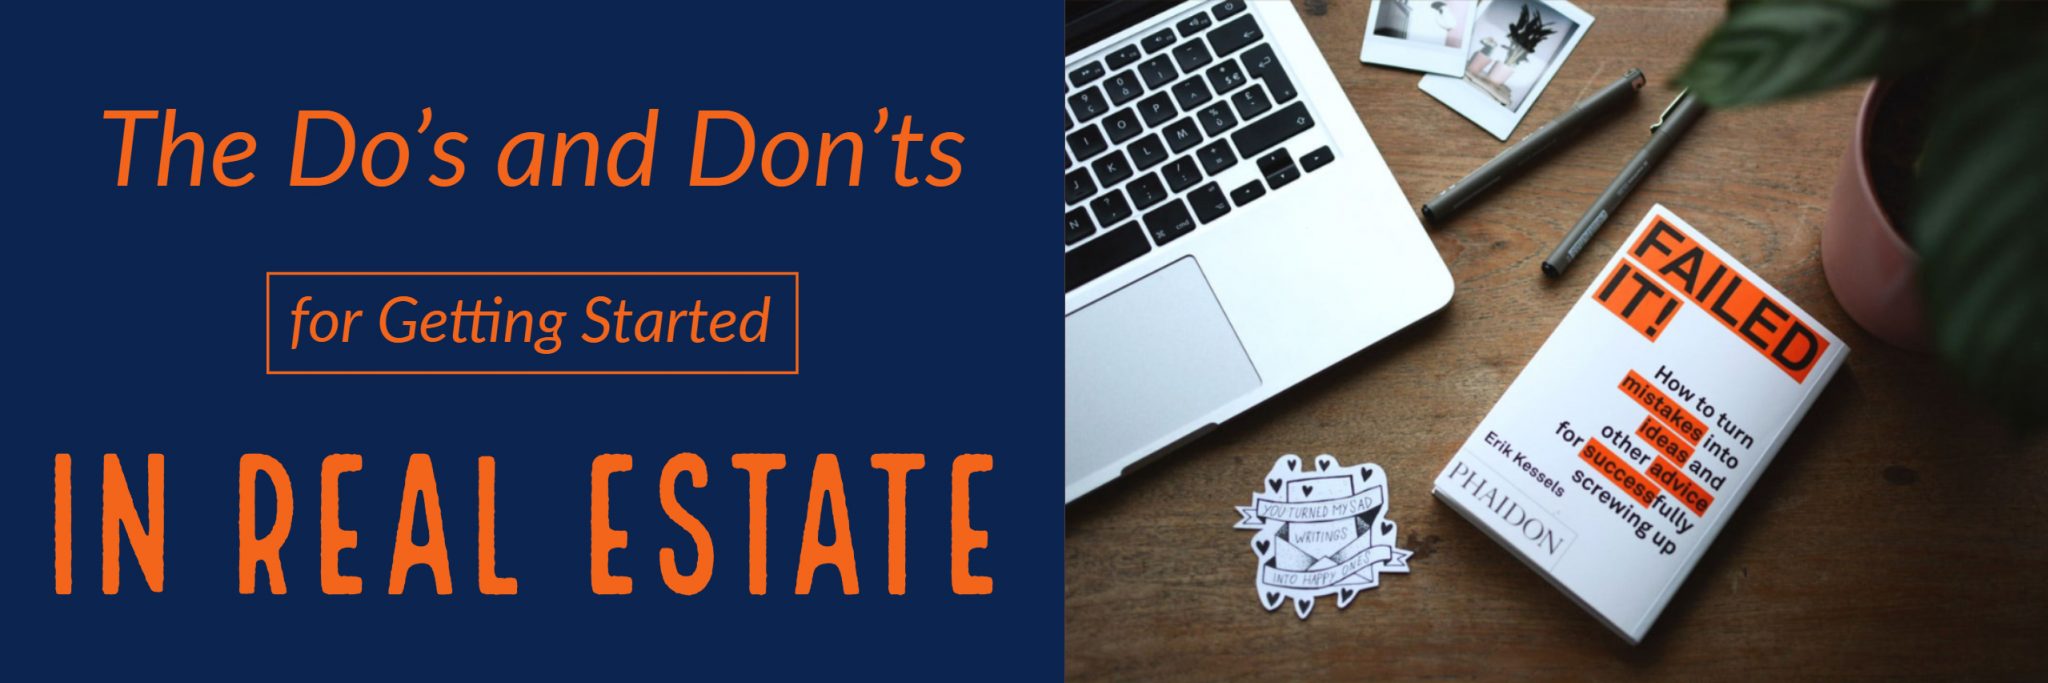 The Do's and Don’ts for Getting Started in Real Estate